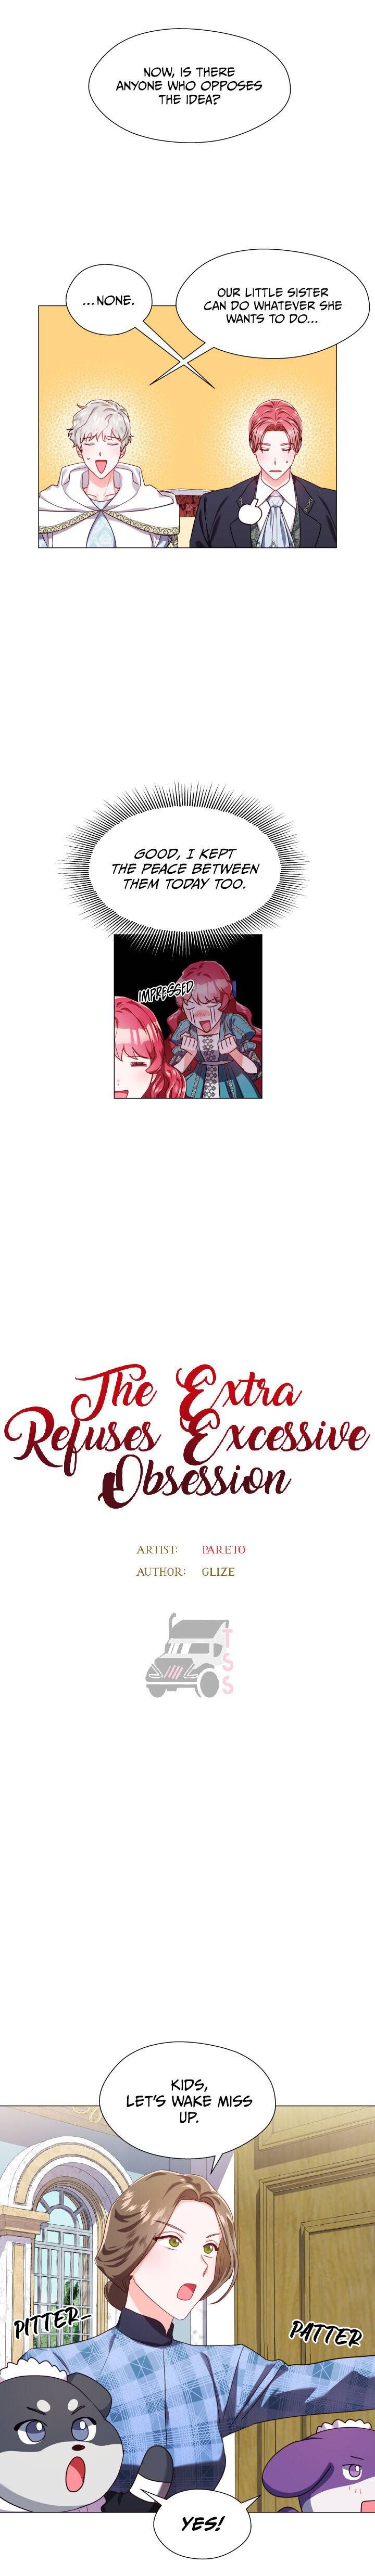 The Extra Refuses Excessive Obsession Chapter 23 page 3